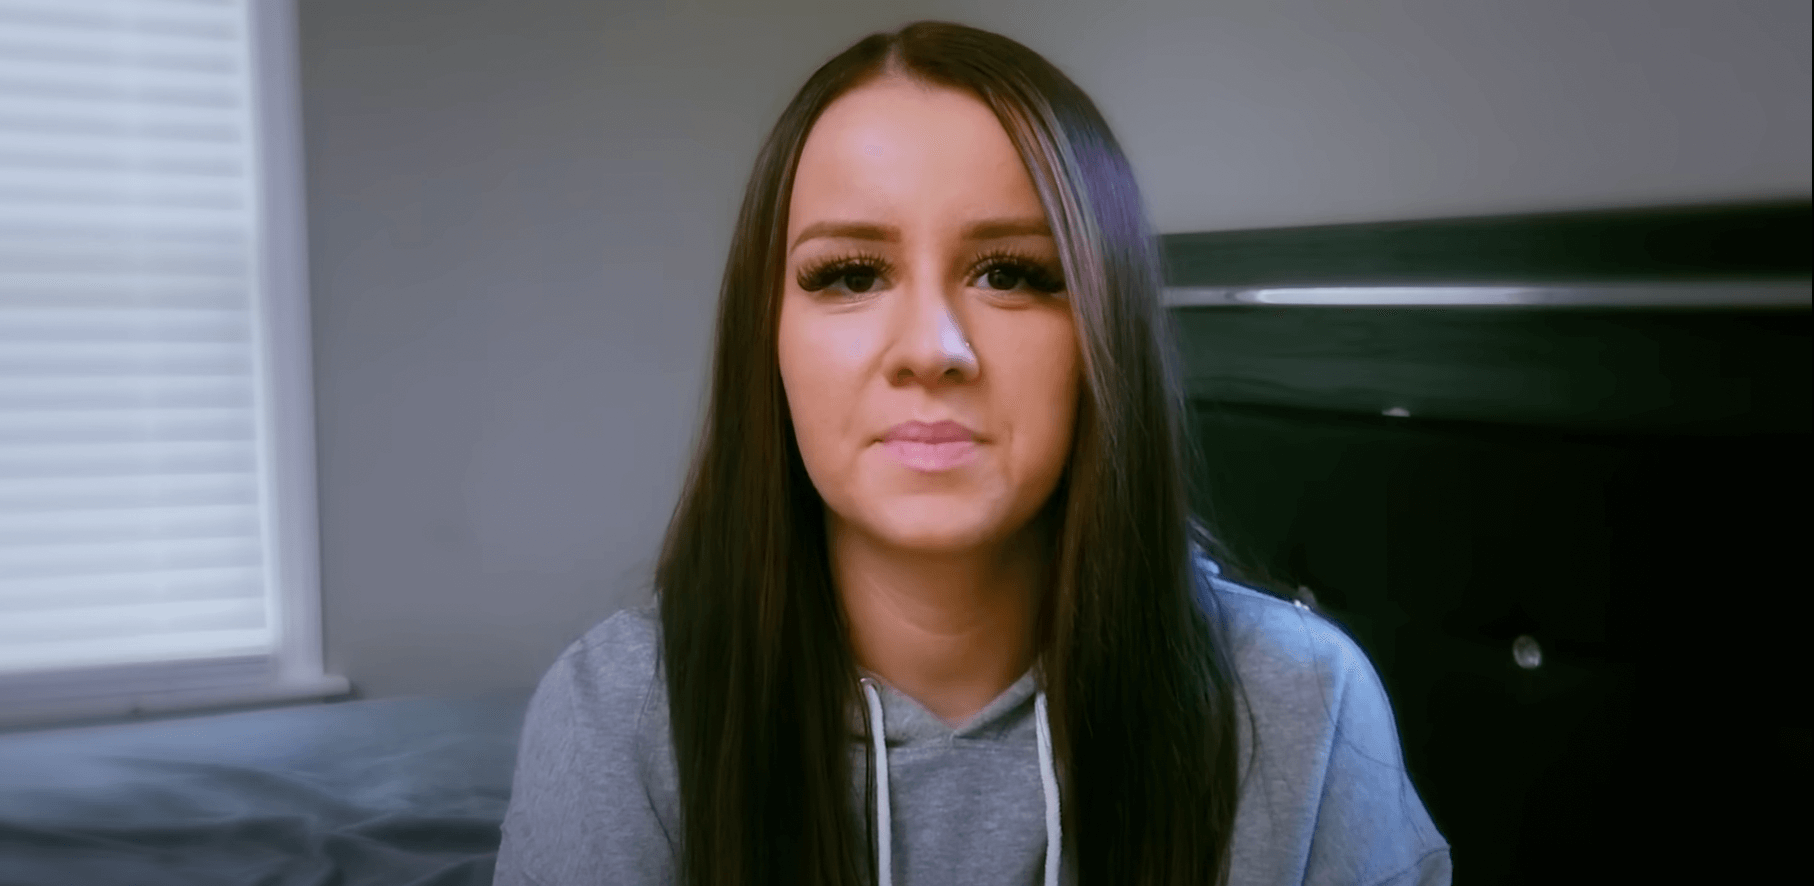 'Teen Mom: Young & Pregnant' star Kayla Sessler looking into the camera